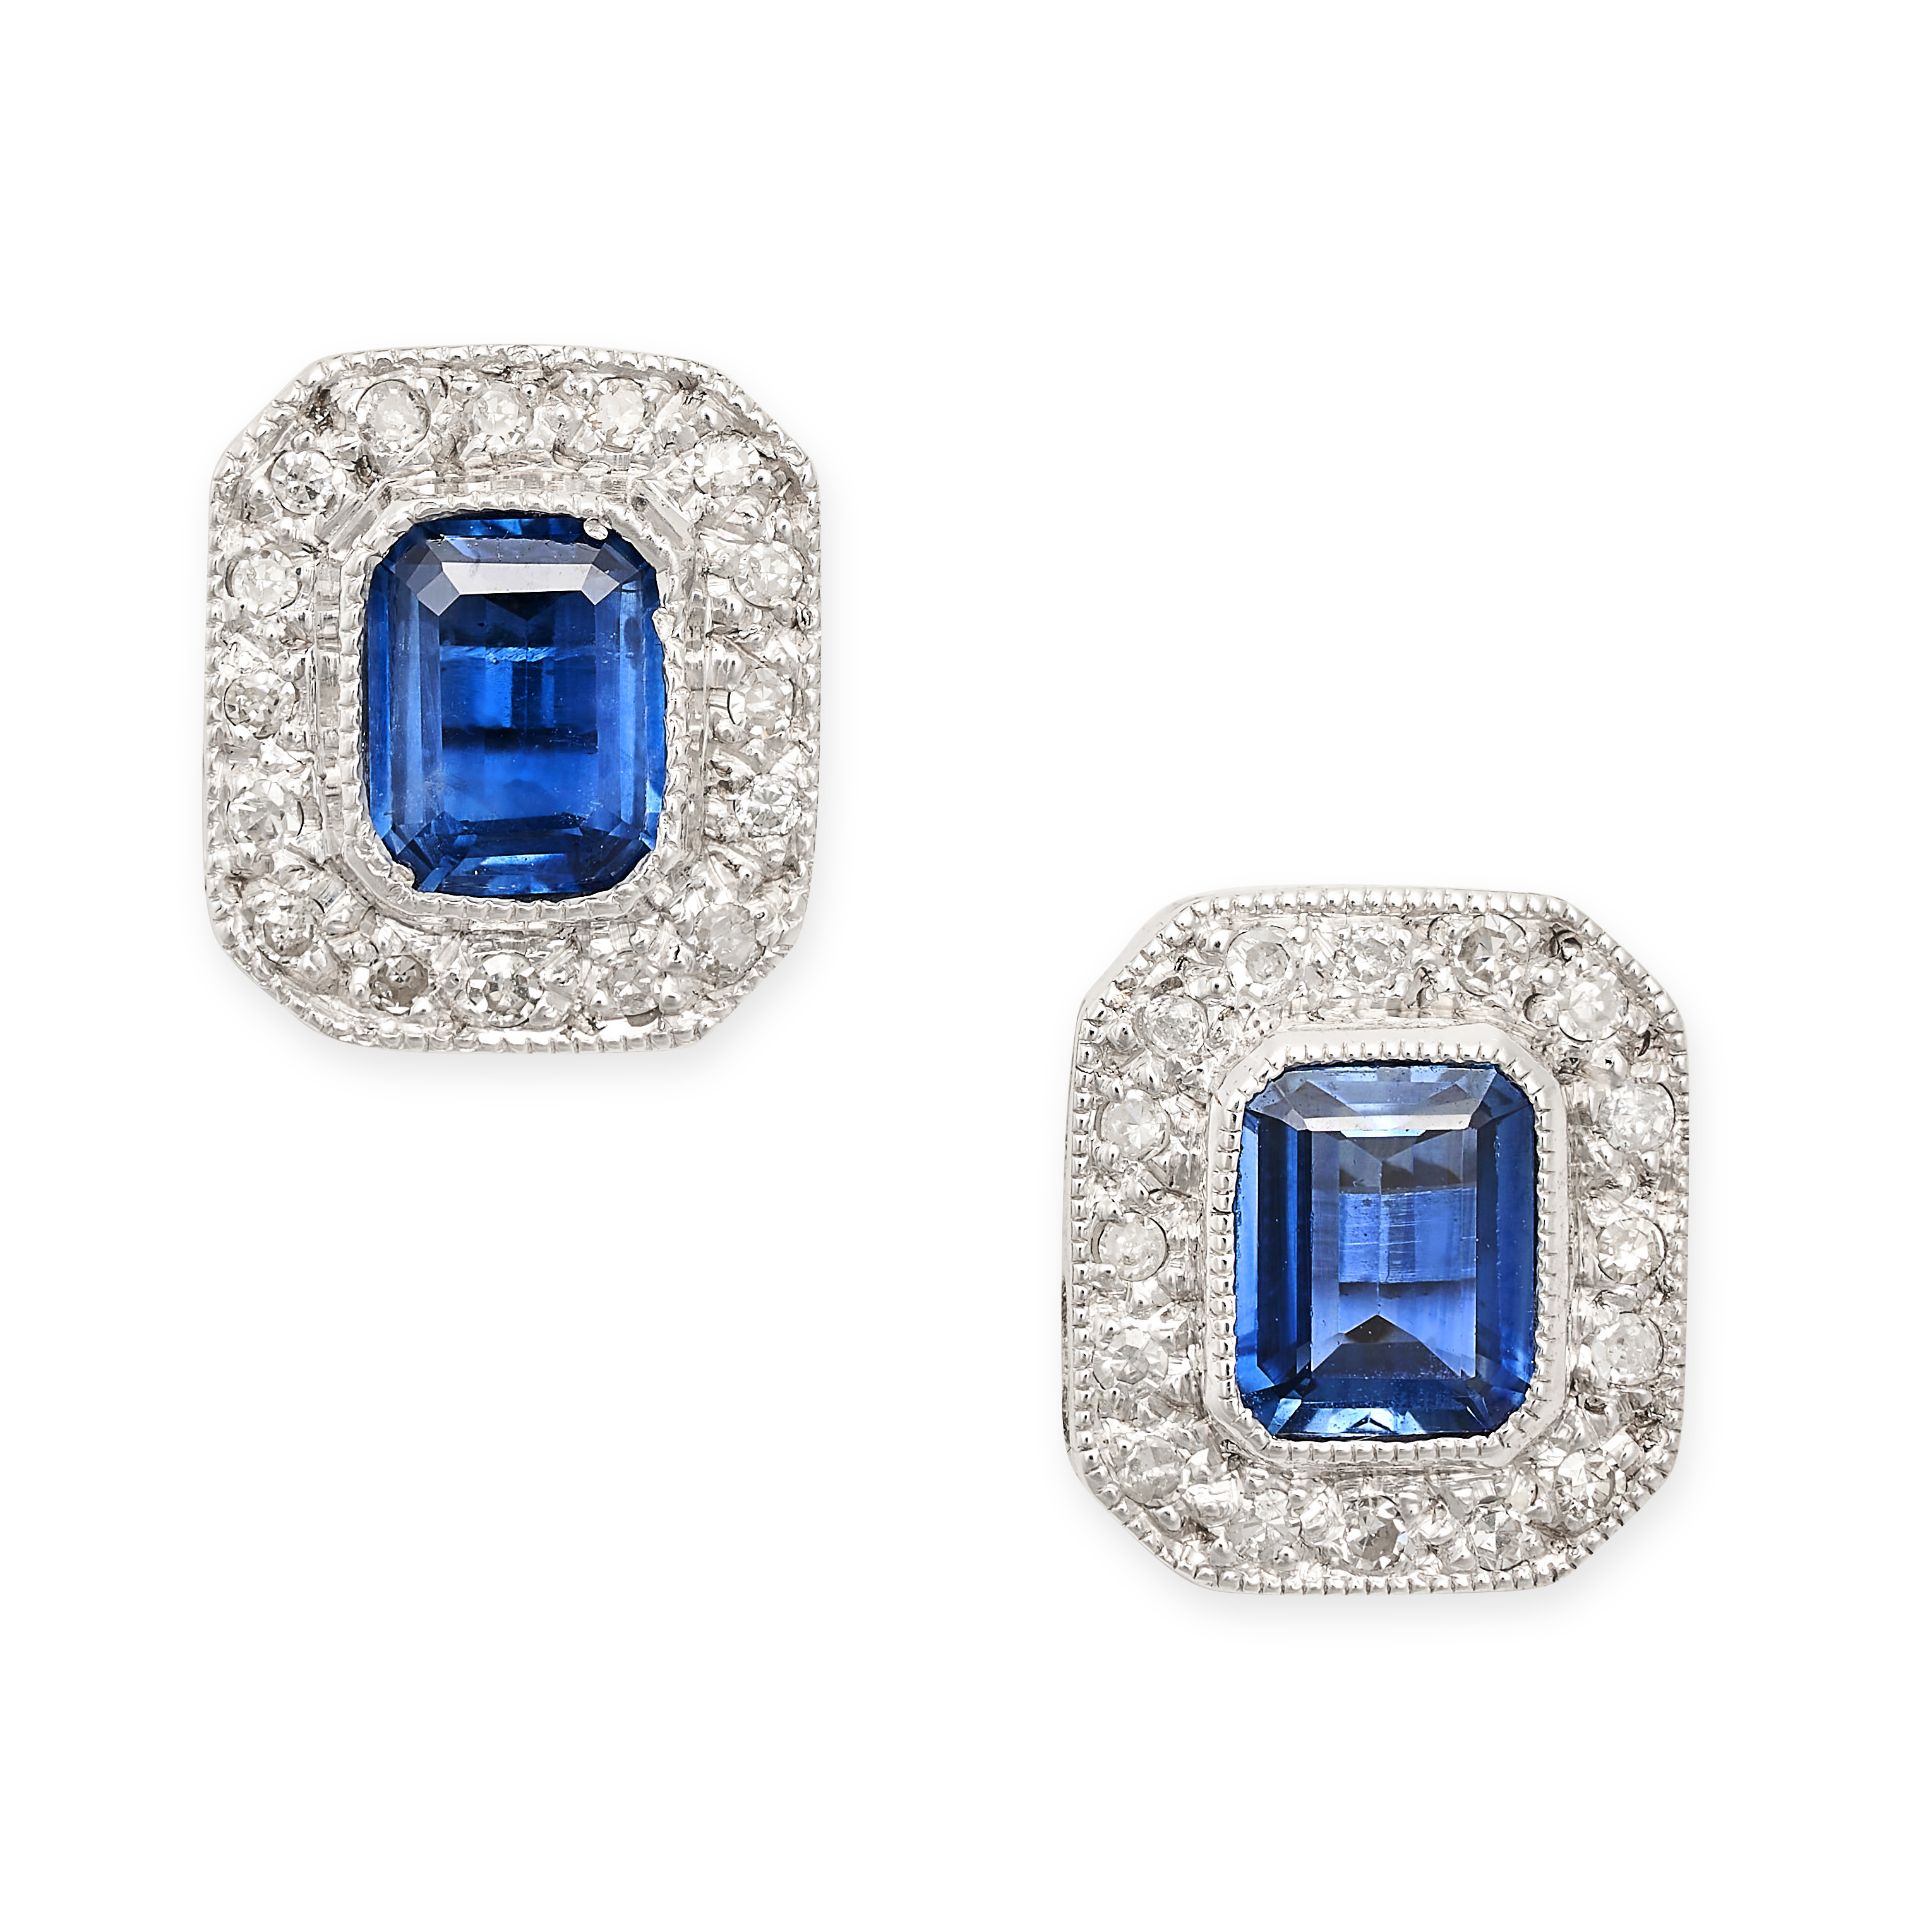 A PAIR OF SAPPHIRE AND DIAMOND STUD EARRINGS in white gold, each set with an octagonal cut blue